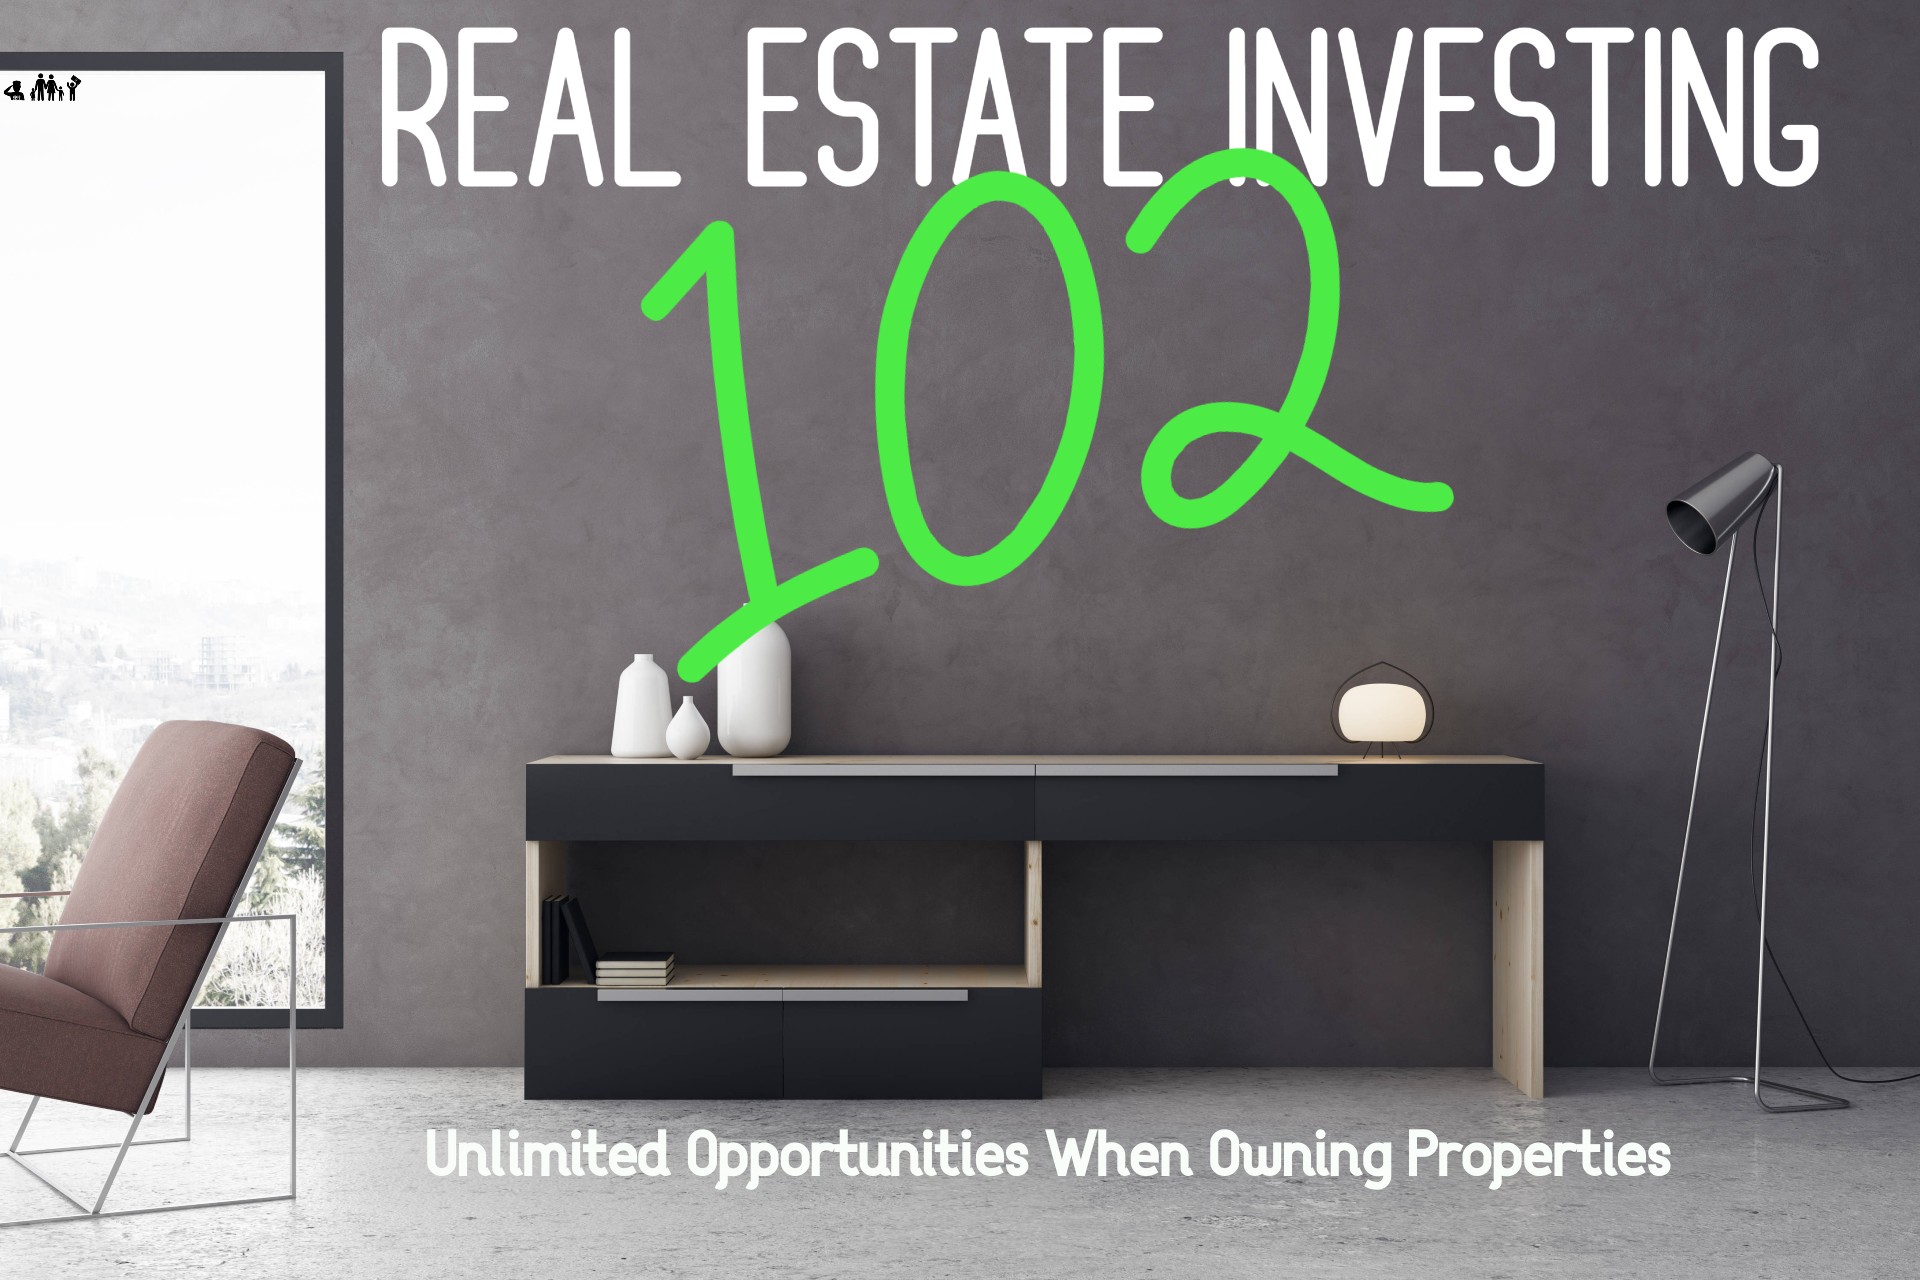 Real Estate Investing 102: Unlimited Opportunities when Owning Properties